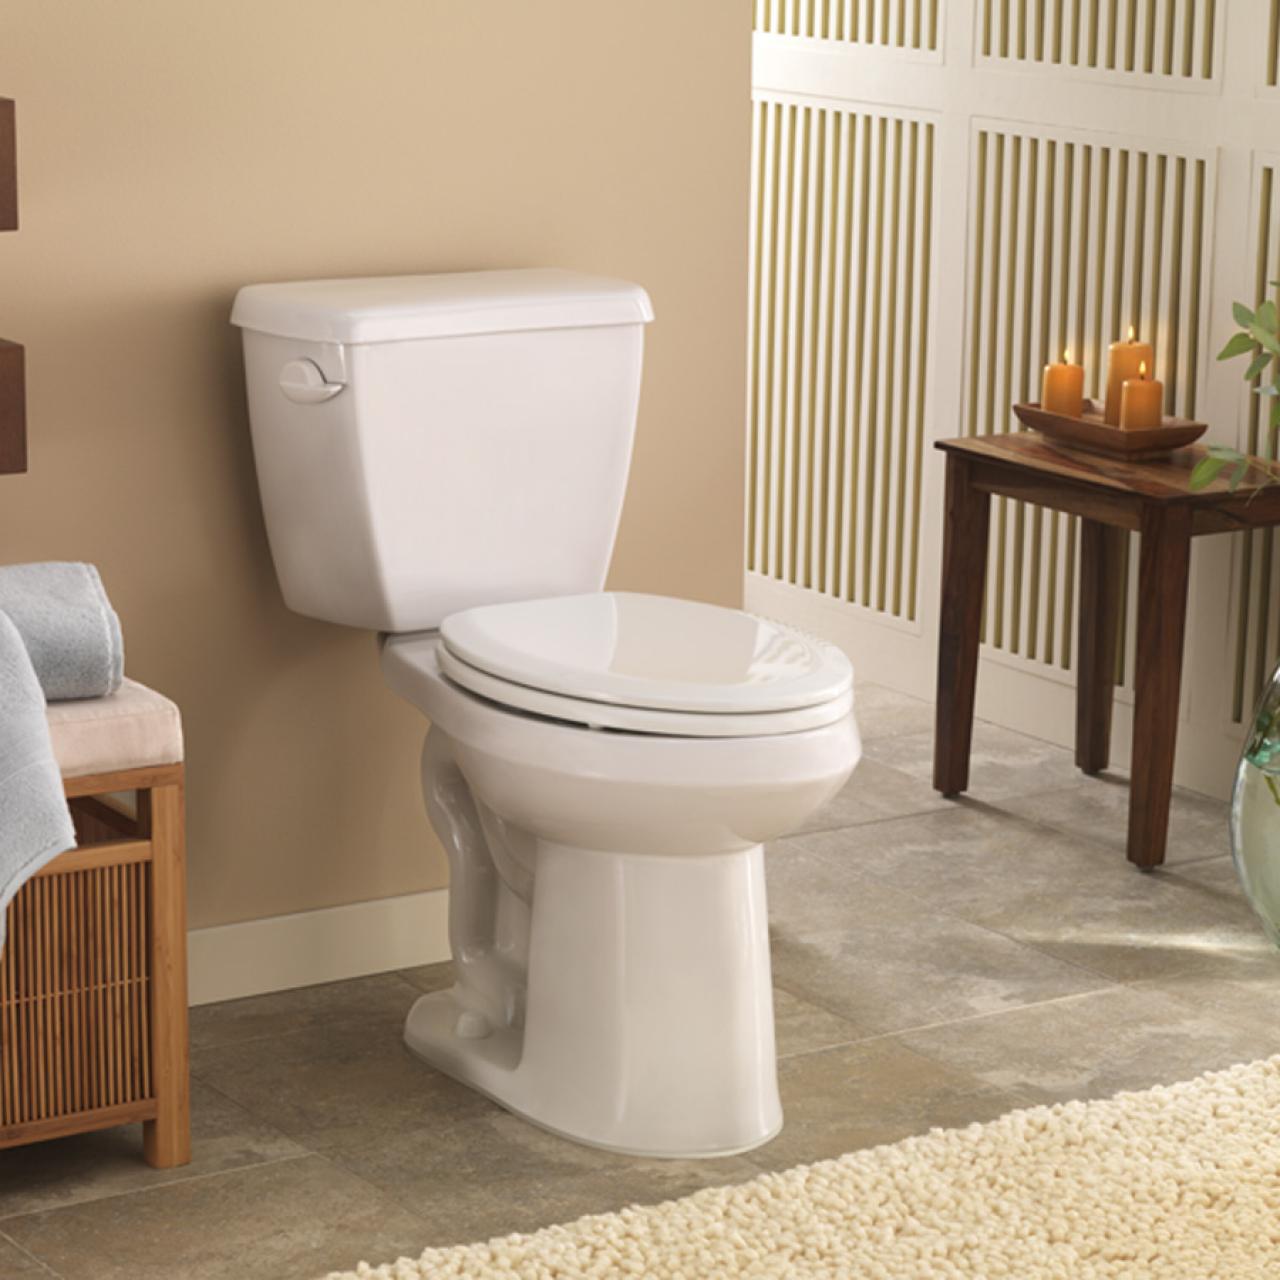 Choose the Right Toilet for Your Bathroom